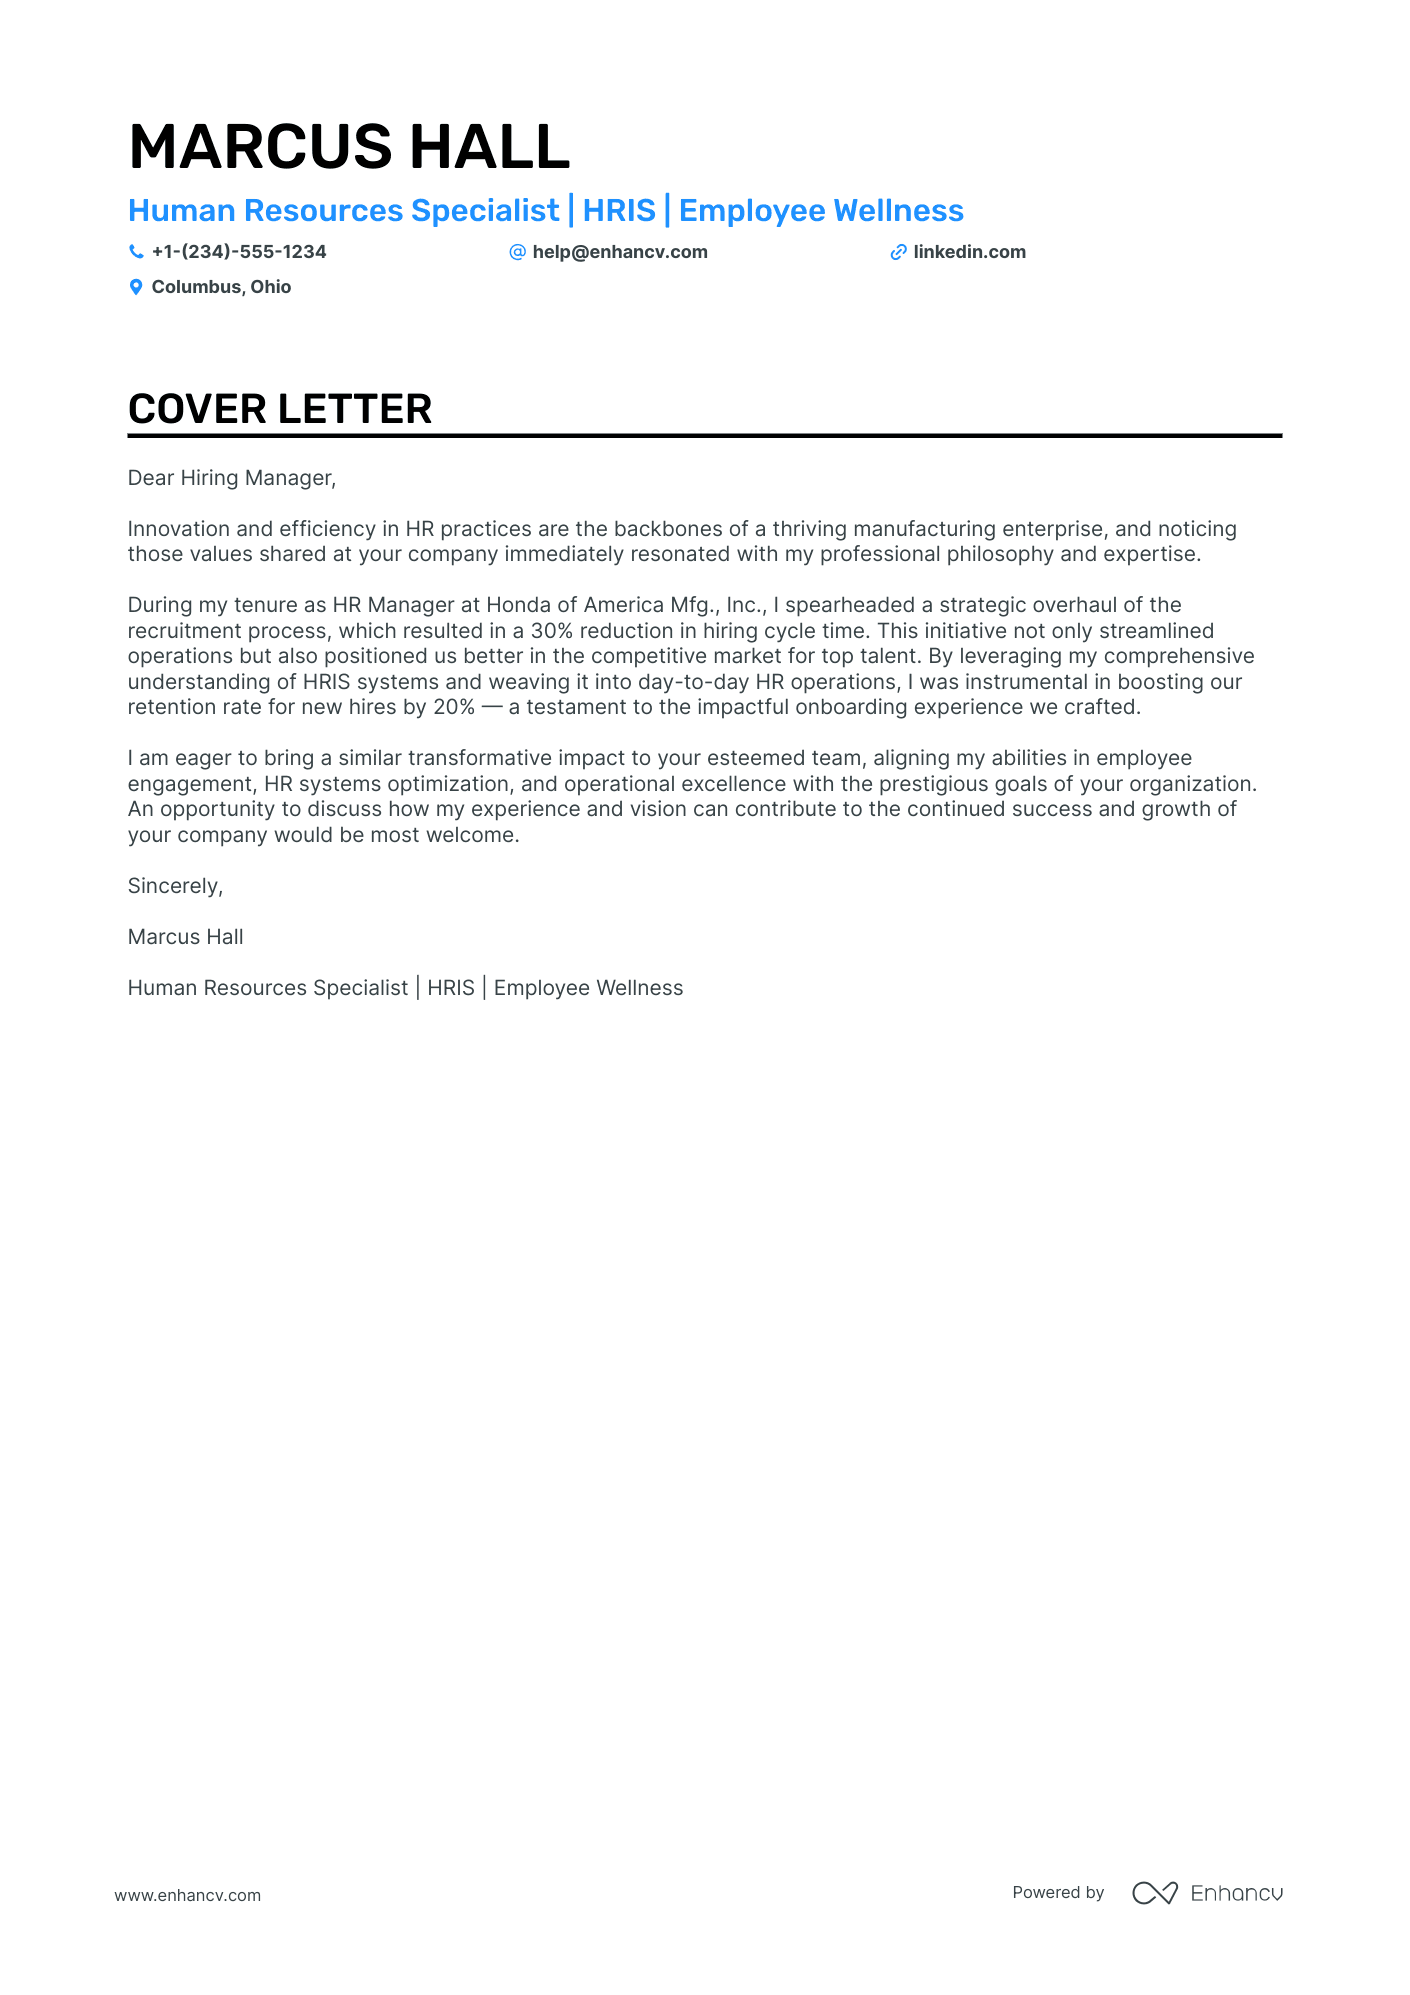 Human Resources Specialist cover letter